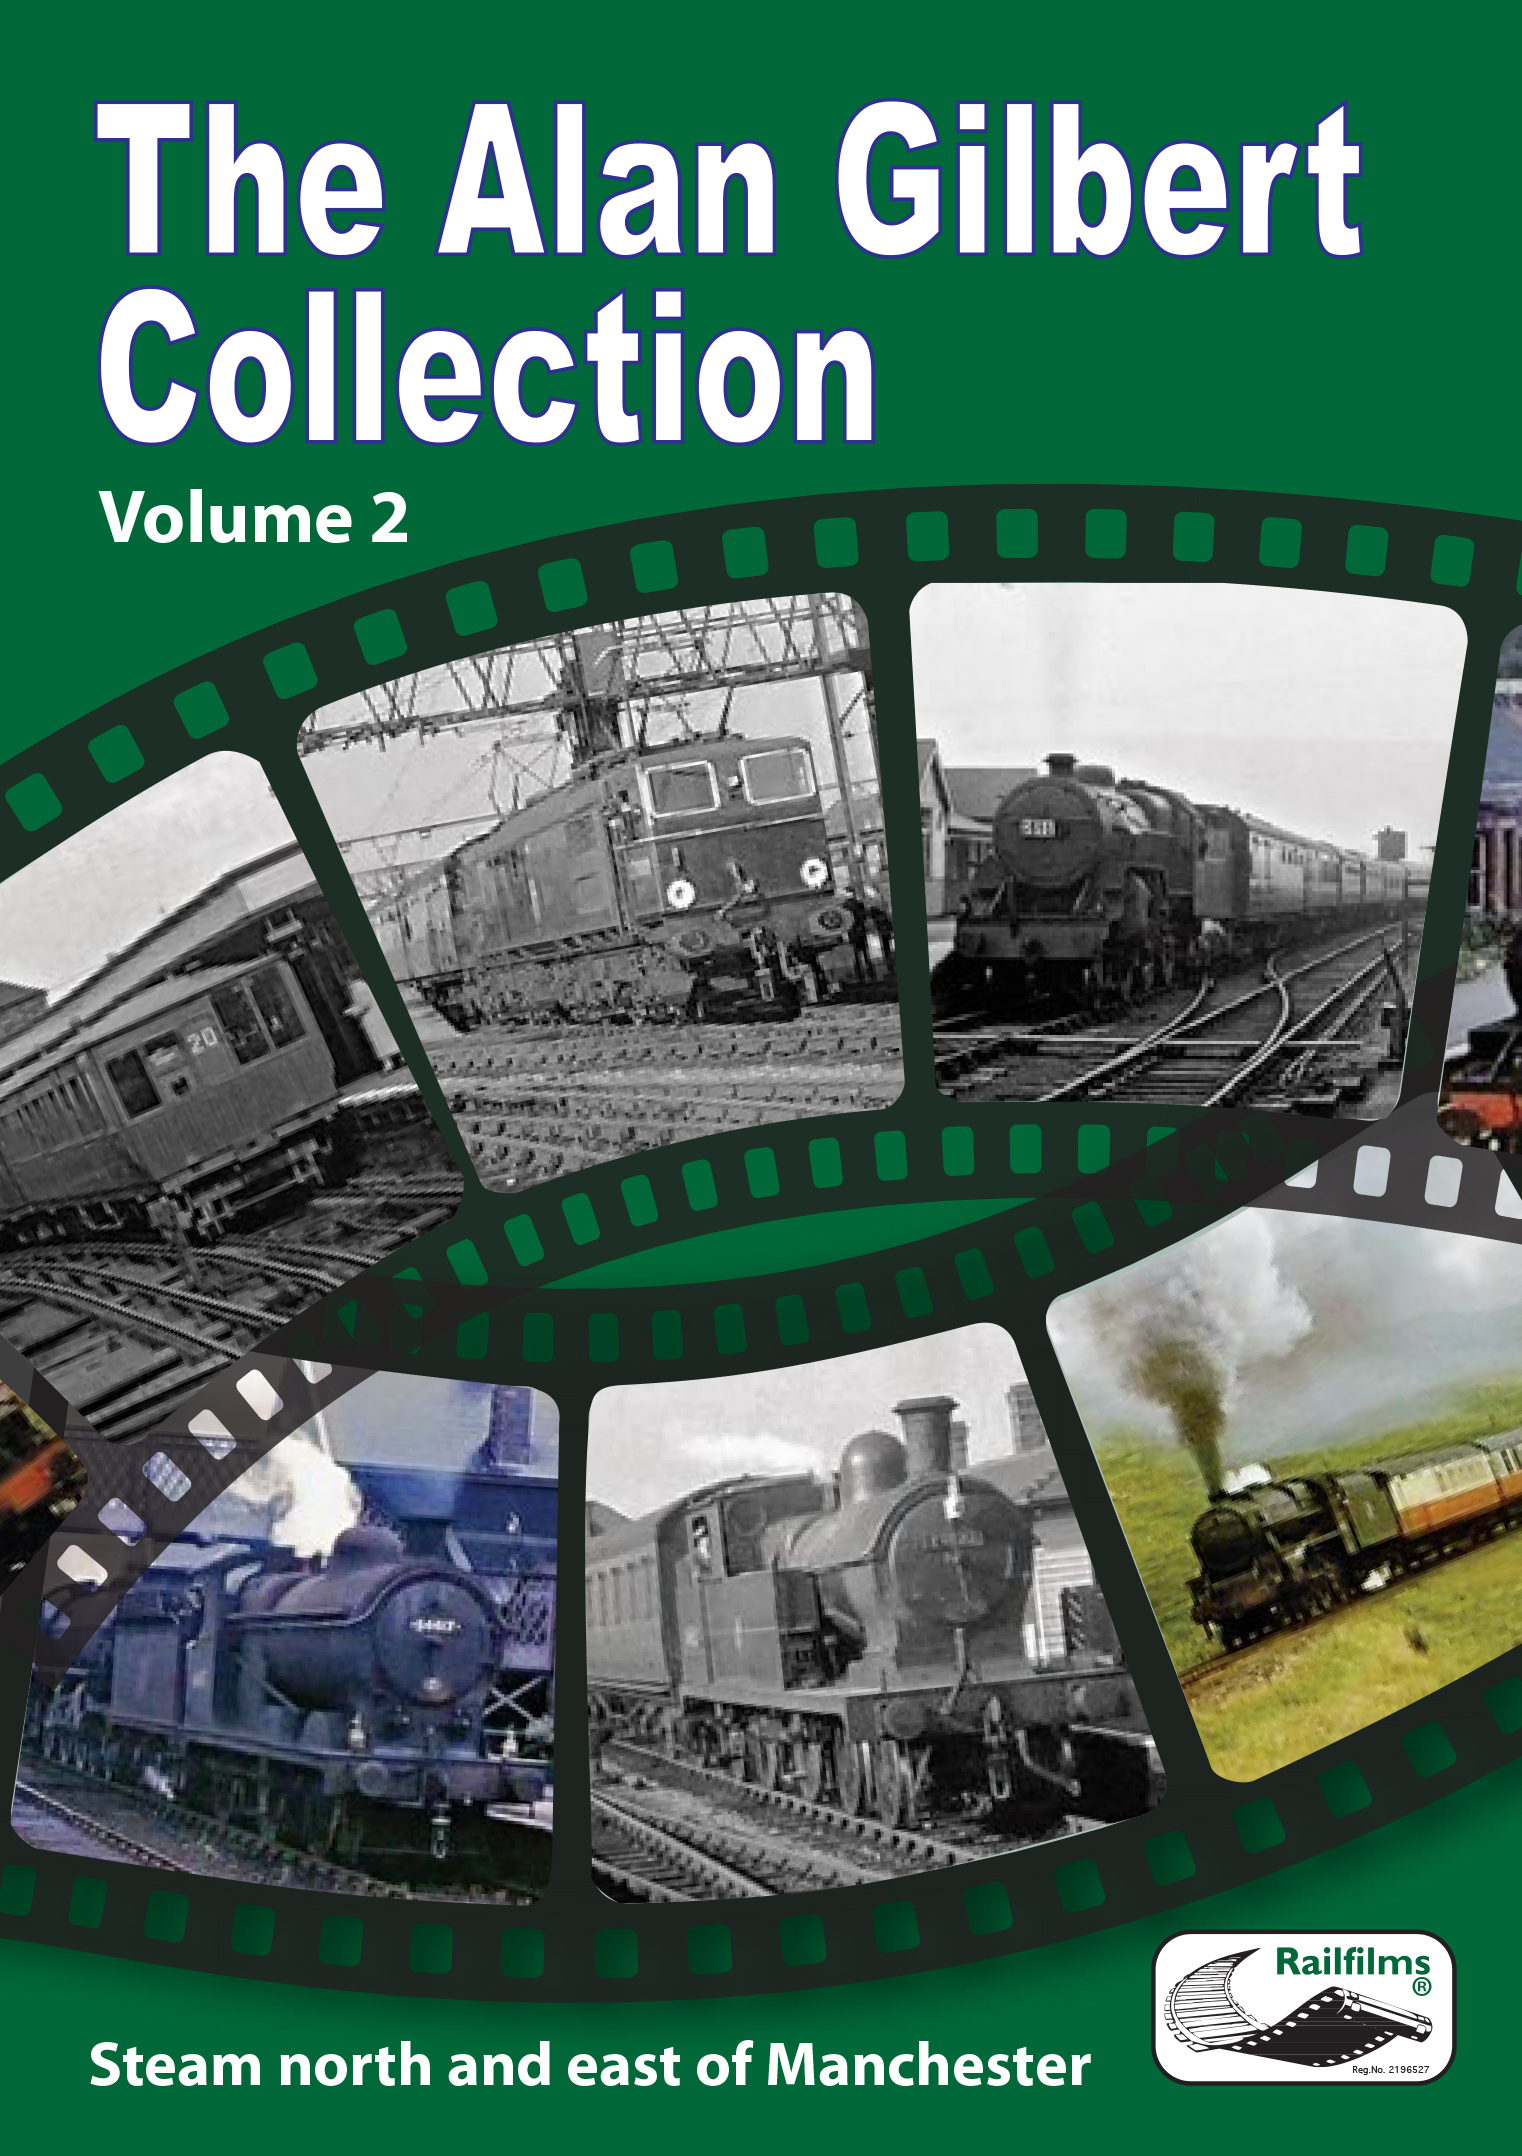 The Alan Gilbert Collection Vol. 2: Steam North and East of Manchester